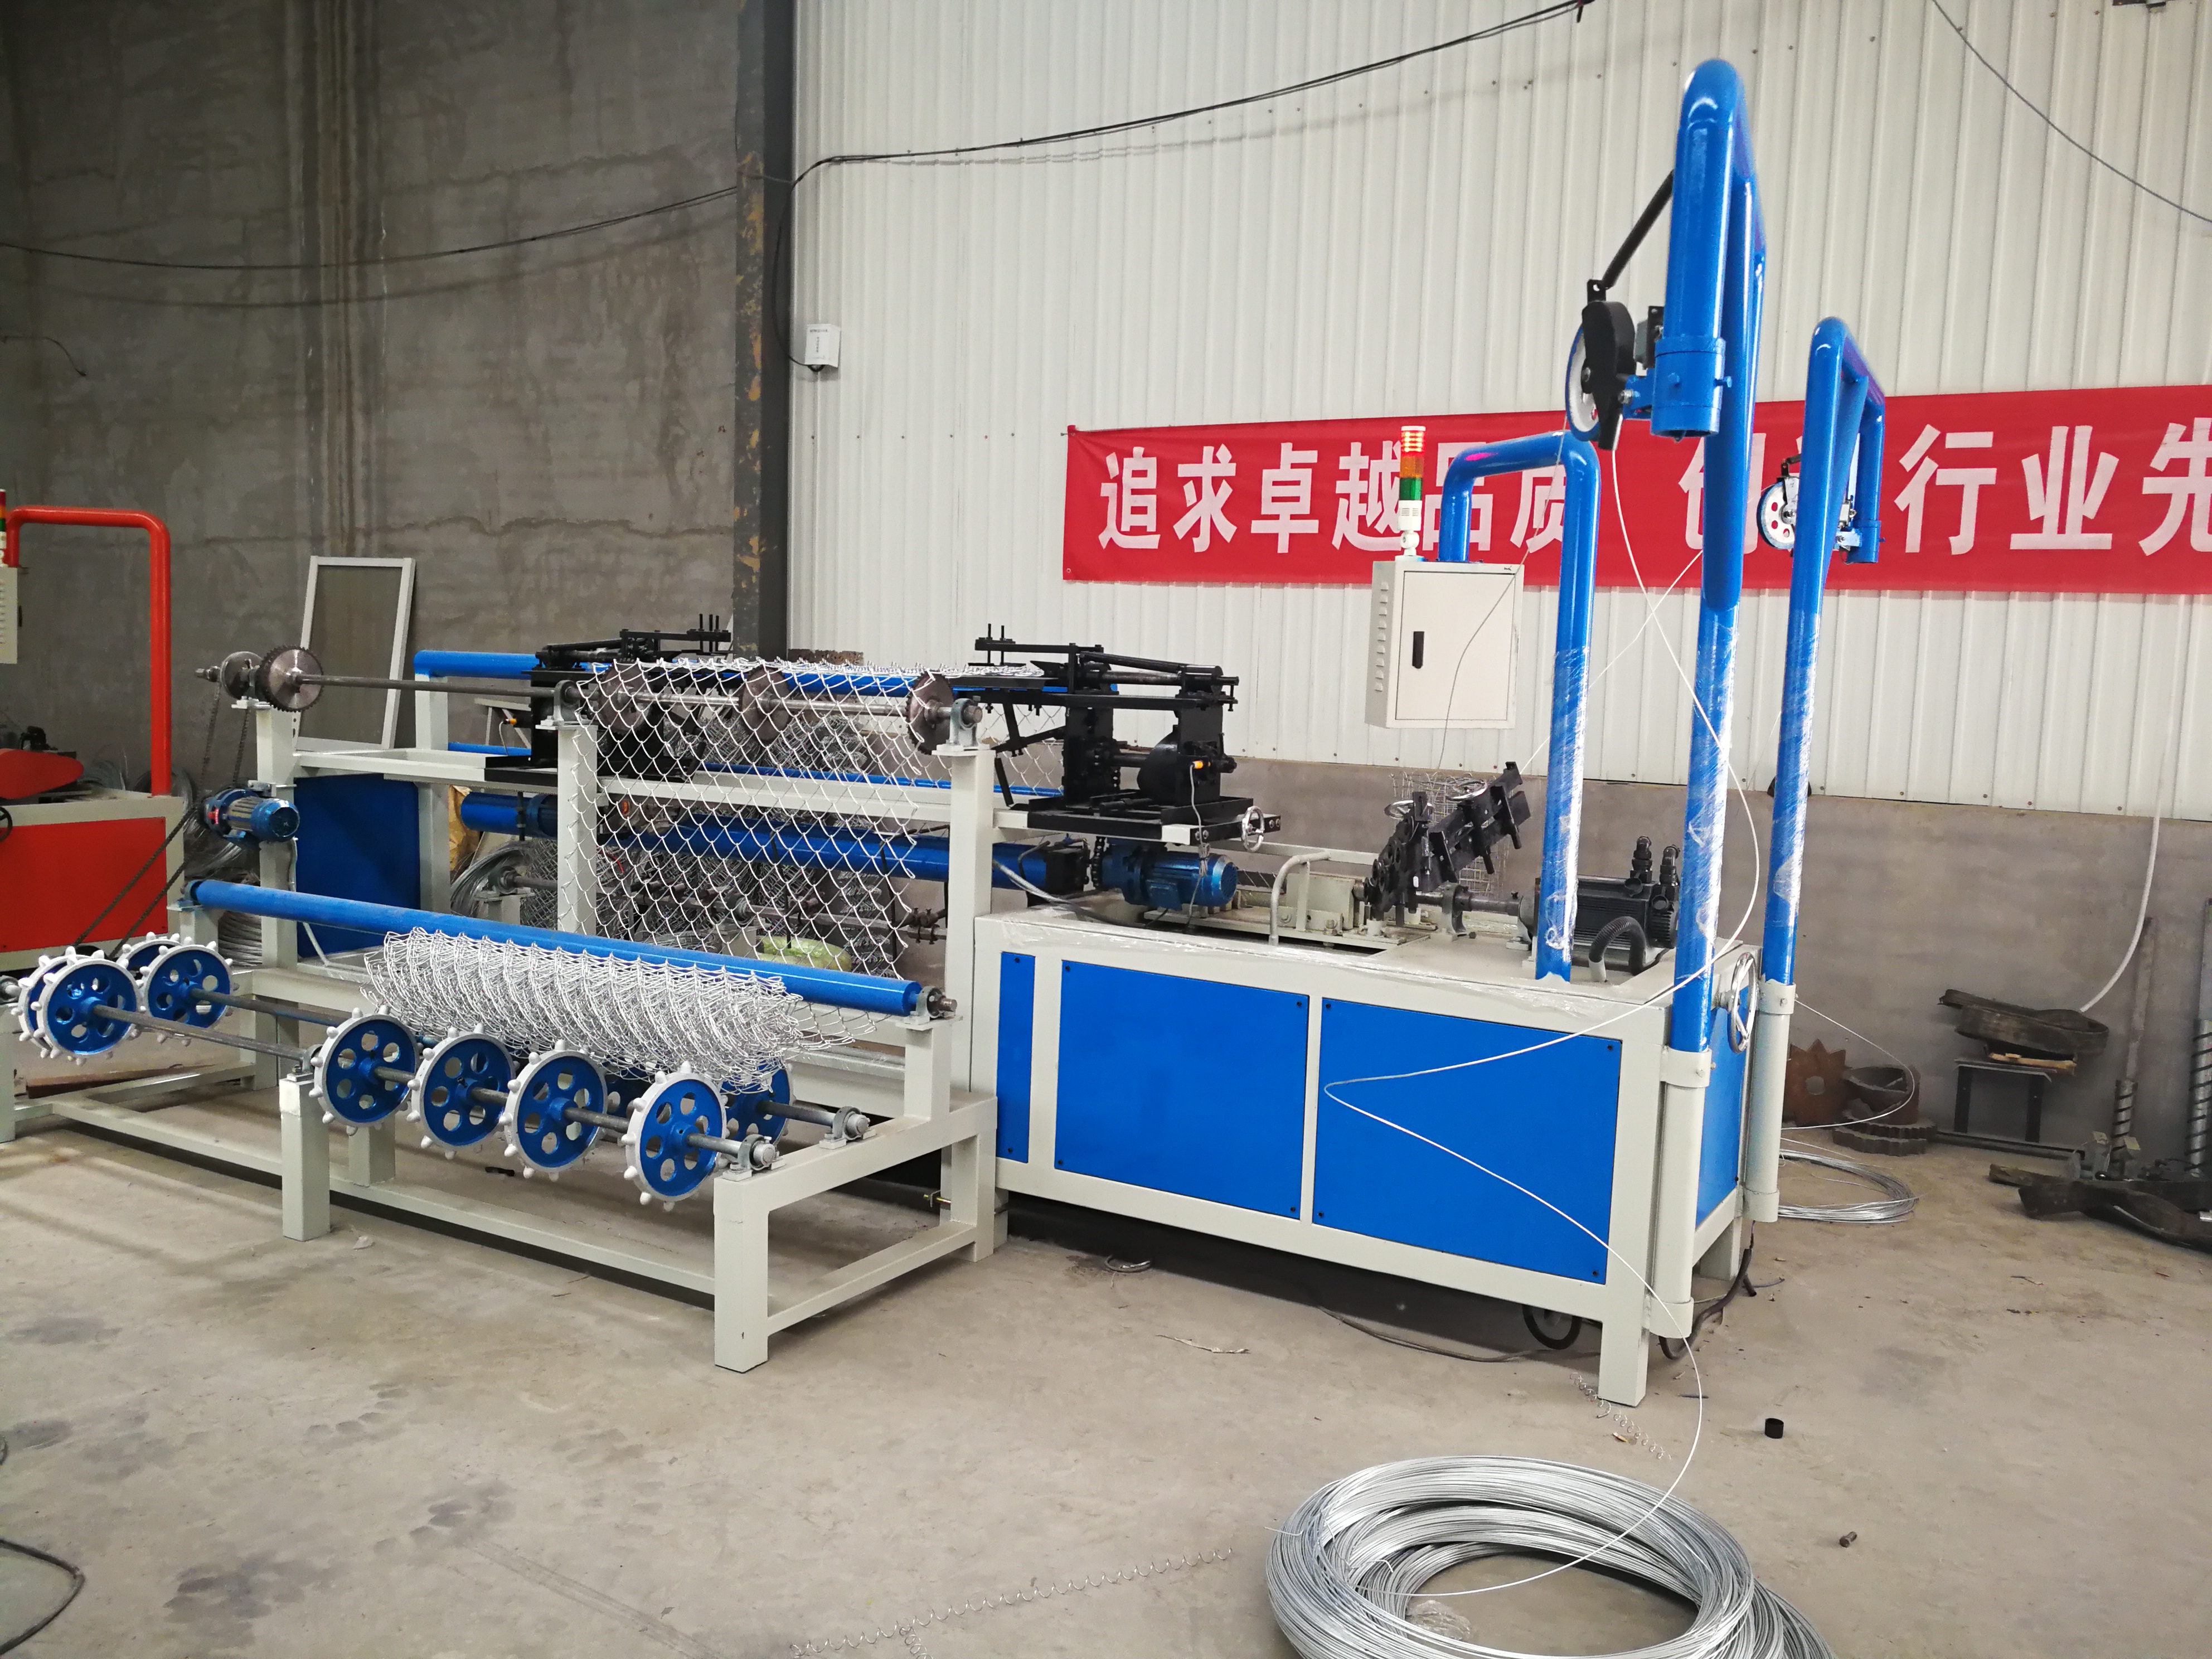 electrowelded mesh machine by feeding straightened rods